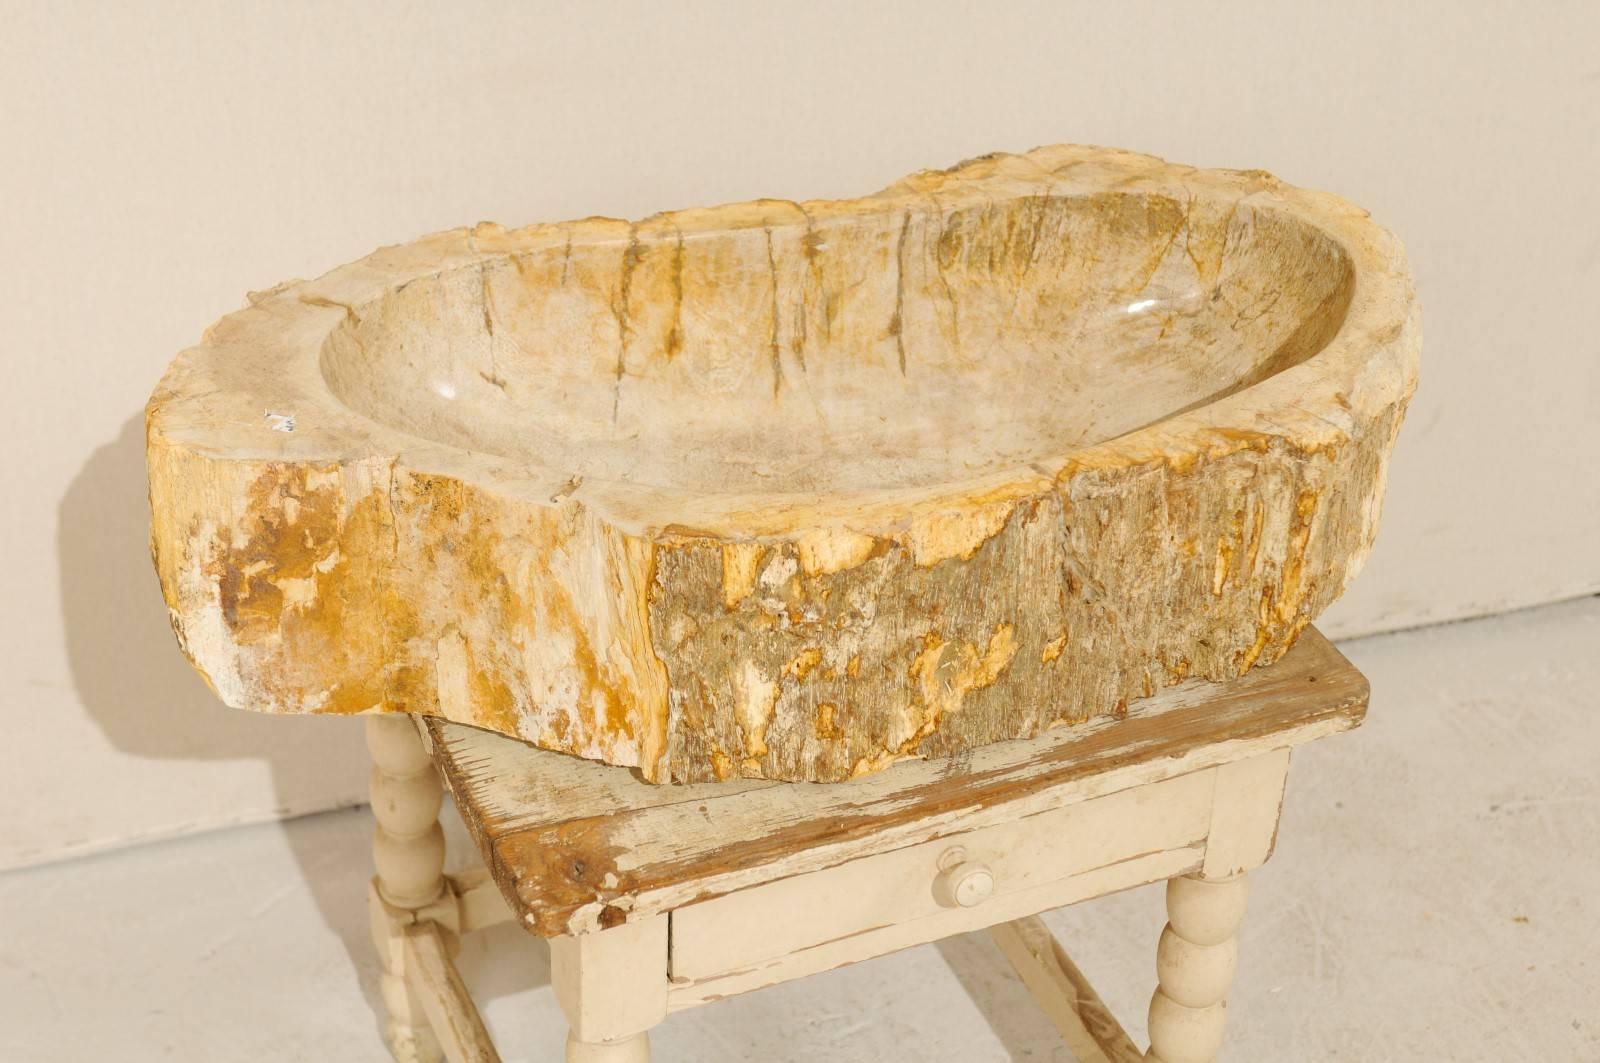 Indonesian Polished Petrified Wood Sink with Rustic Oblong Shape in Warm Cream & Beige